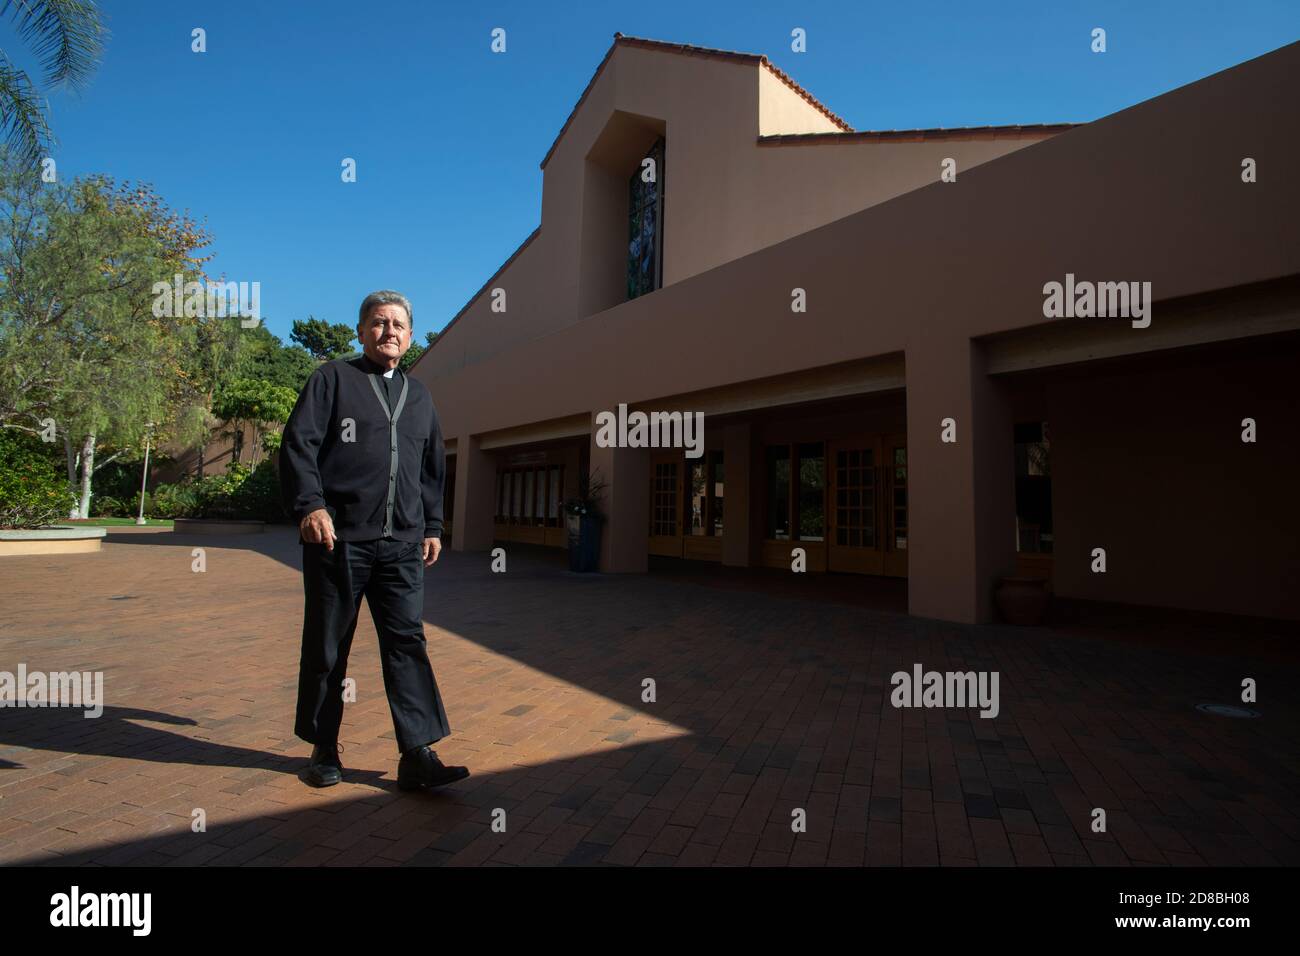 The monsignor of a Southern California Catholic church walks across the church courtyard in after sun and shadow. Stock Photo